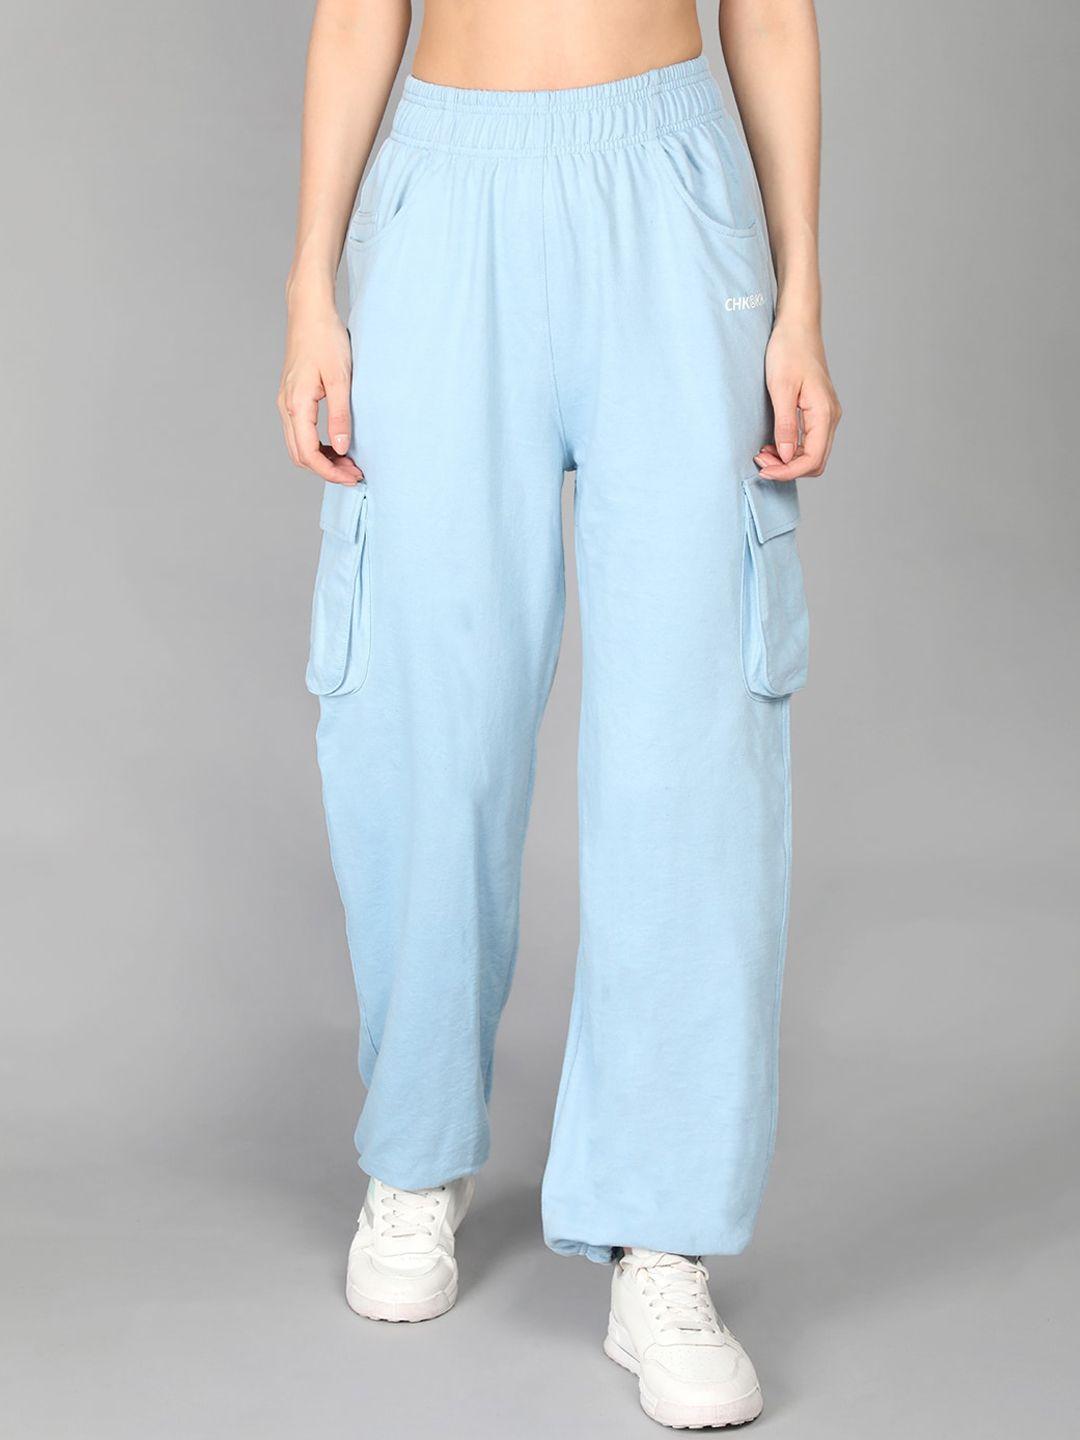 chkokko women blue solid relaxed-fit track pants